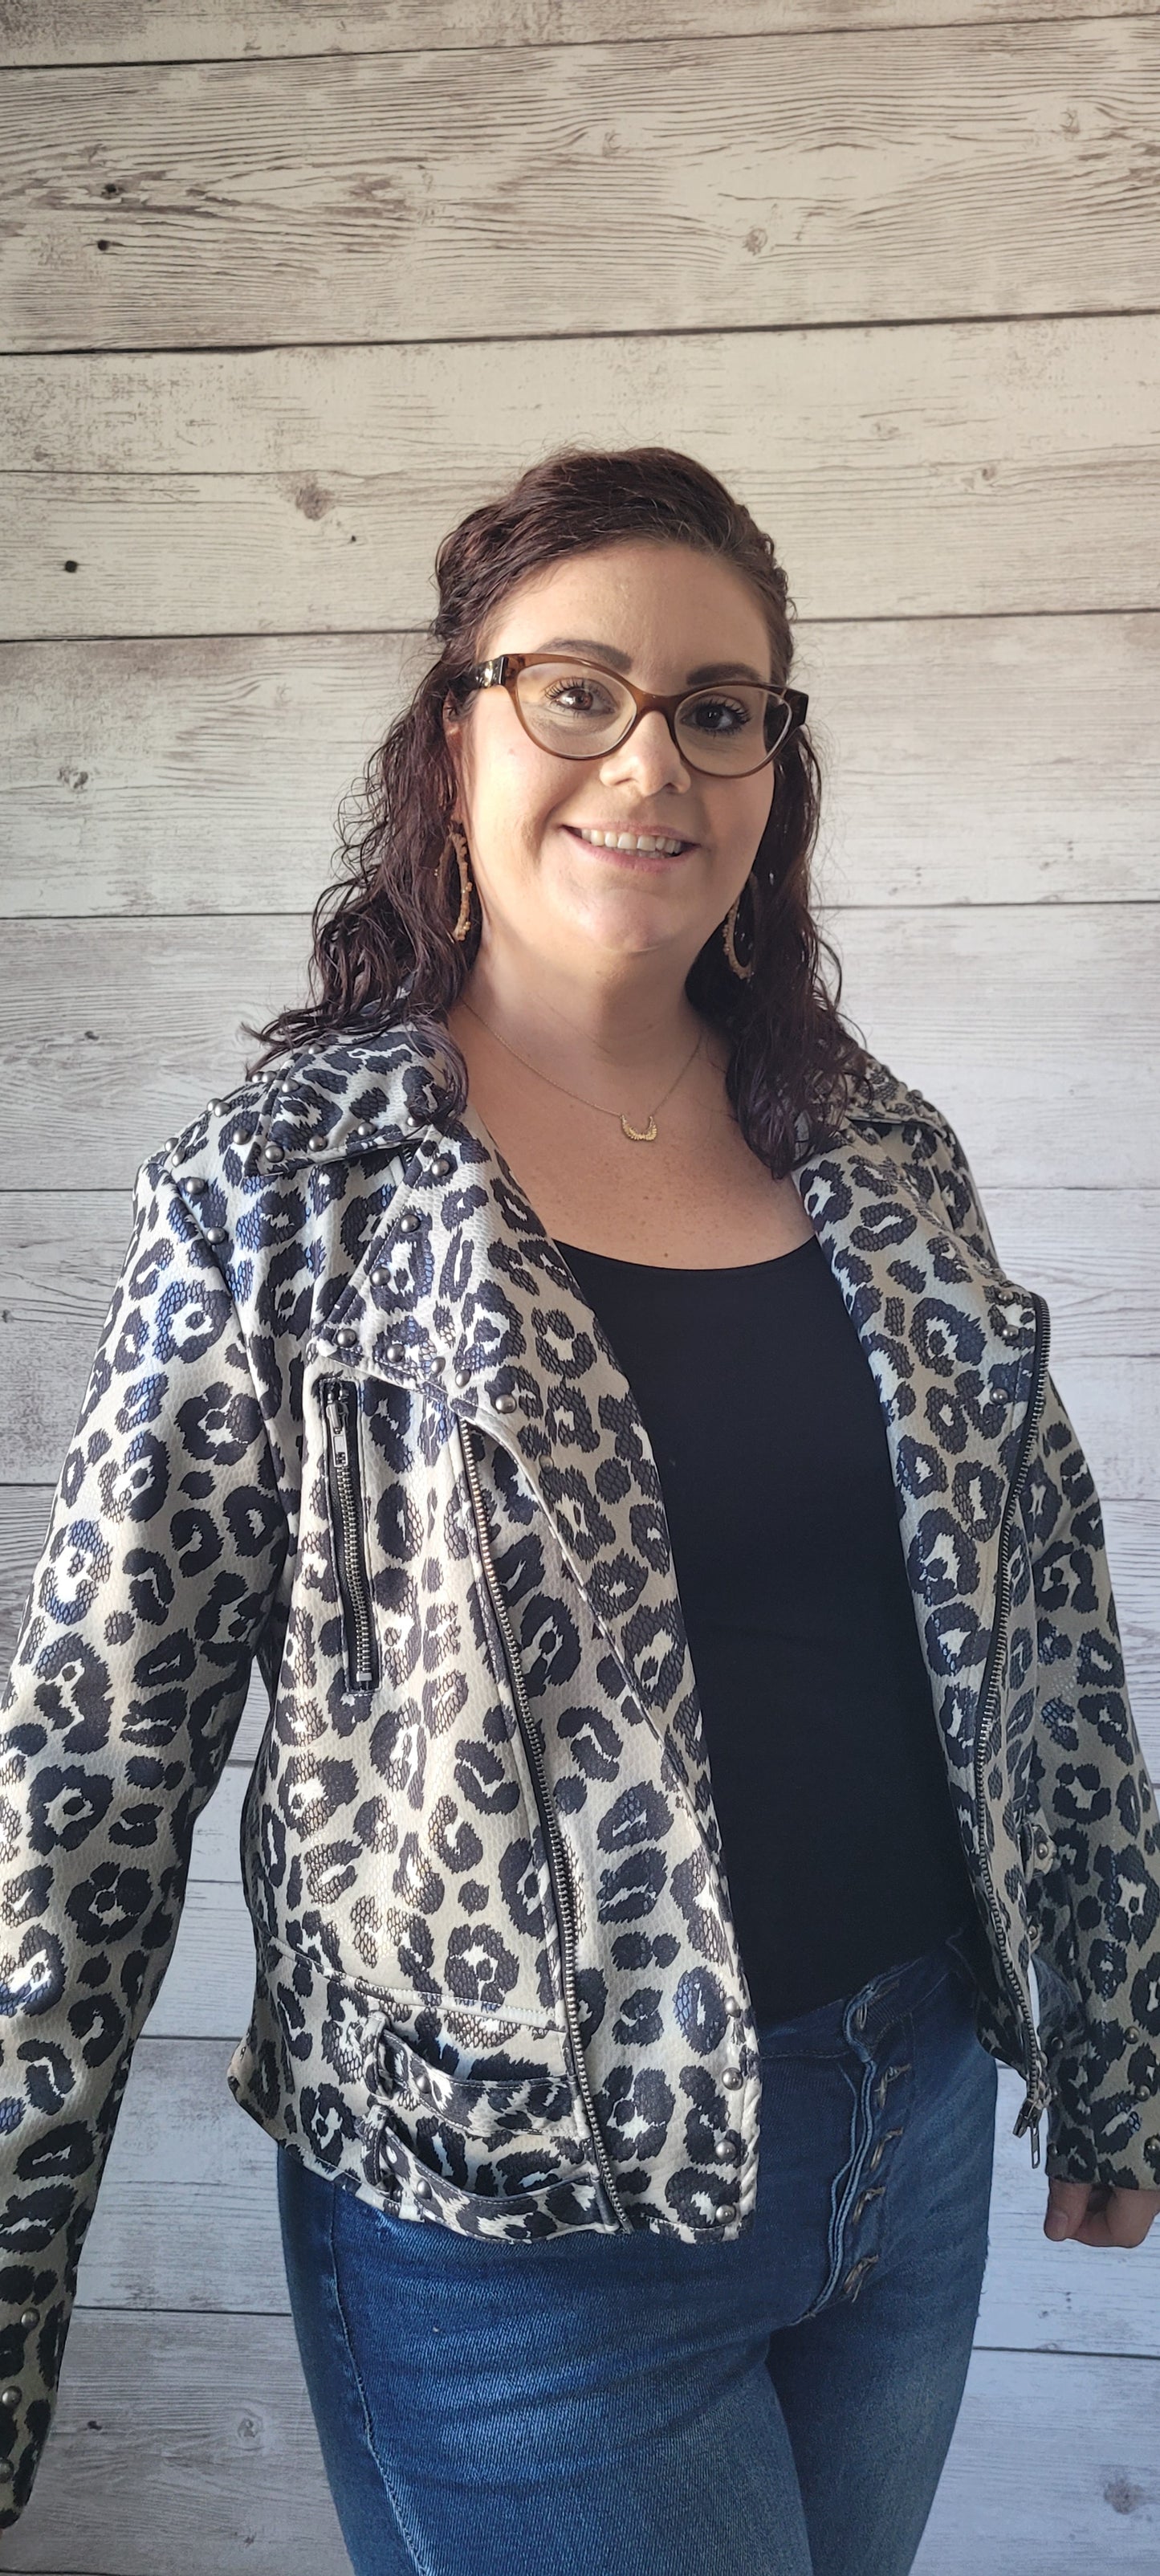 This leopard jacket features two side zippers on front, the main zipper with folded over front, four belt loops for the little added feature, along with eyelet buttons for professional detailing. This adorable jacket is very soft and lightweight . Go ahead and take a walk on the wild side before it's gone. Sizes medium through x-large.